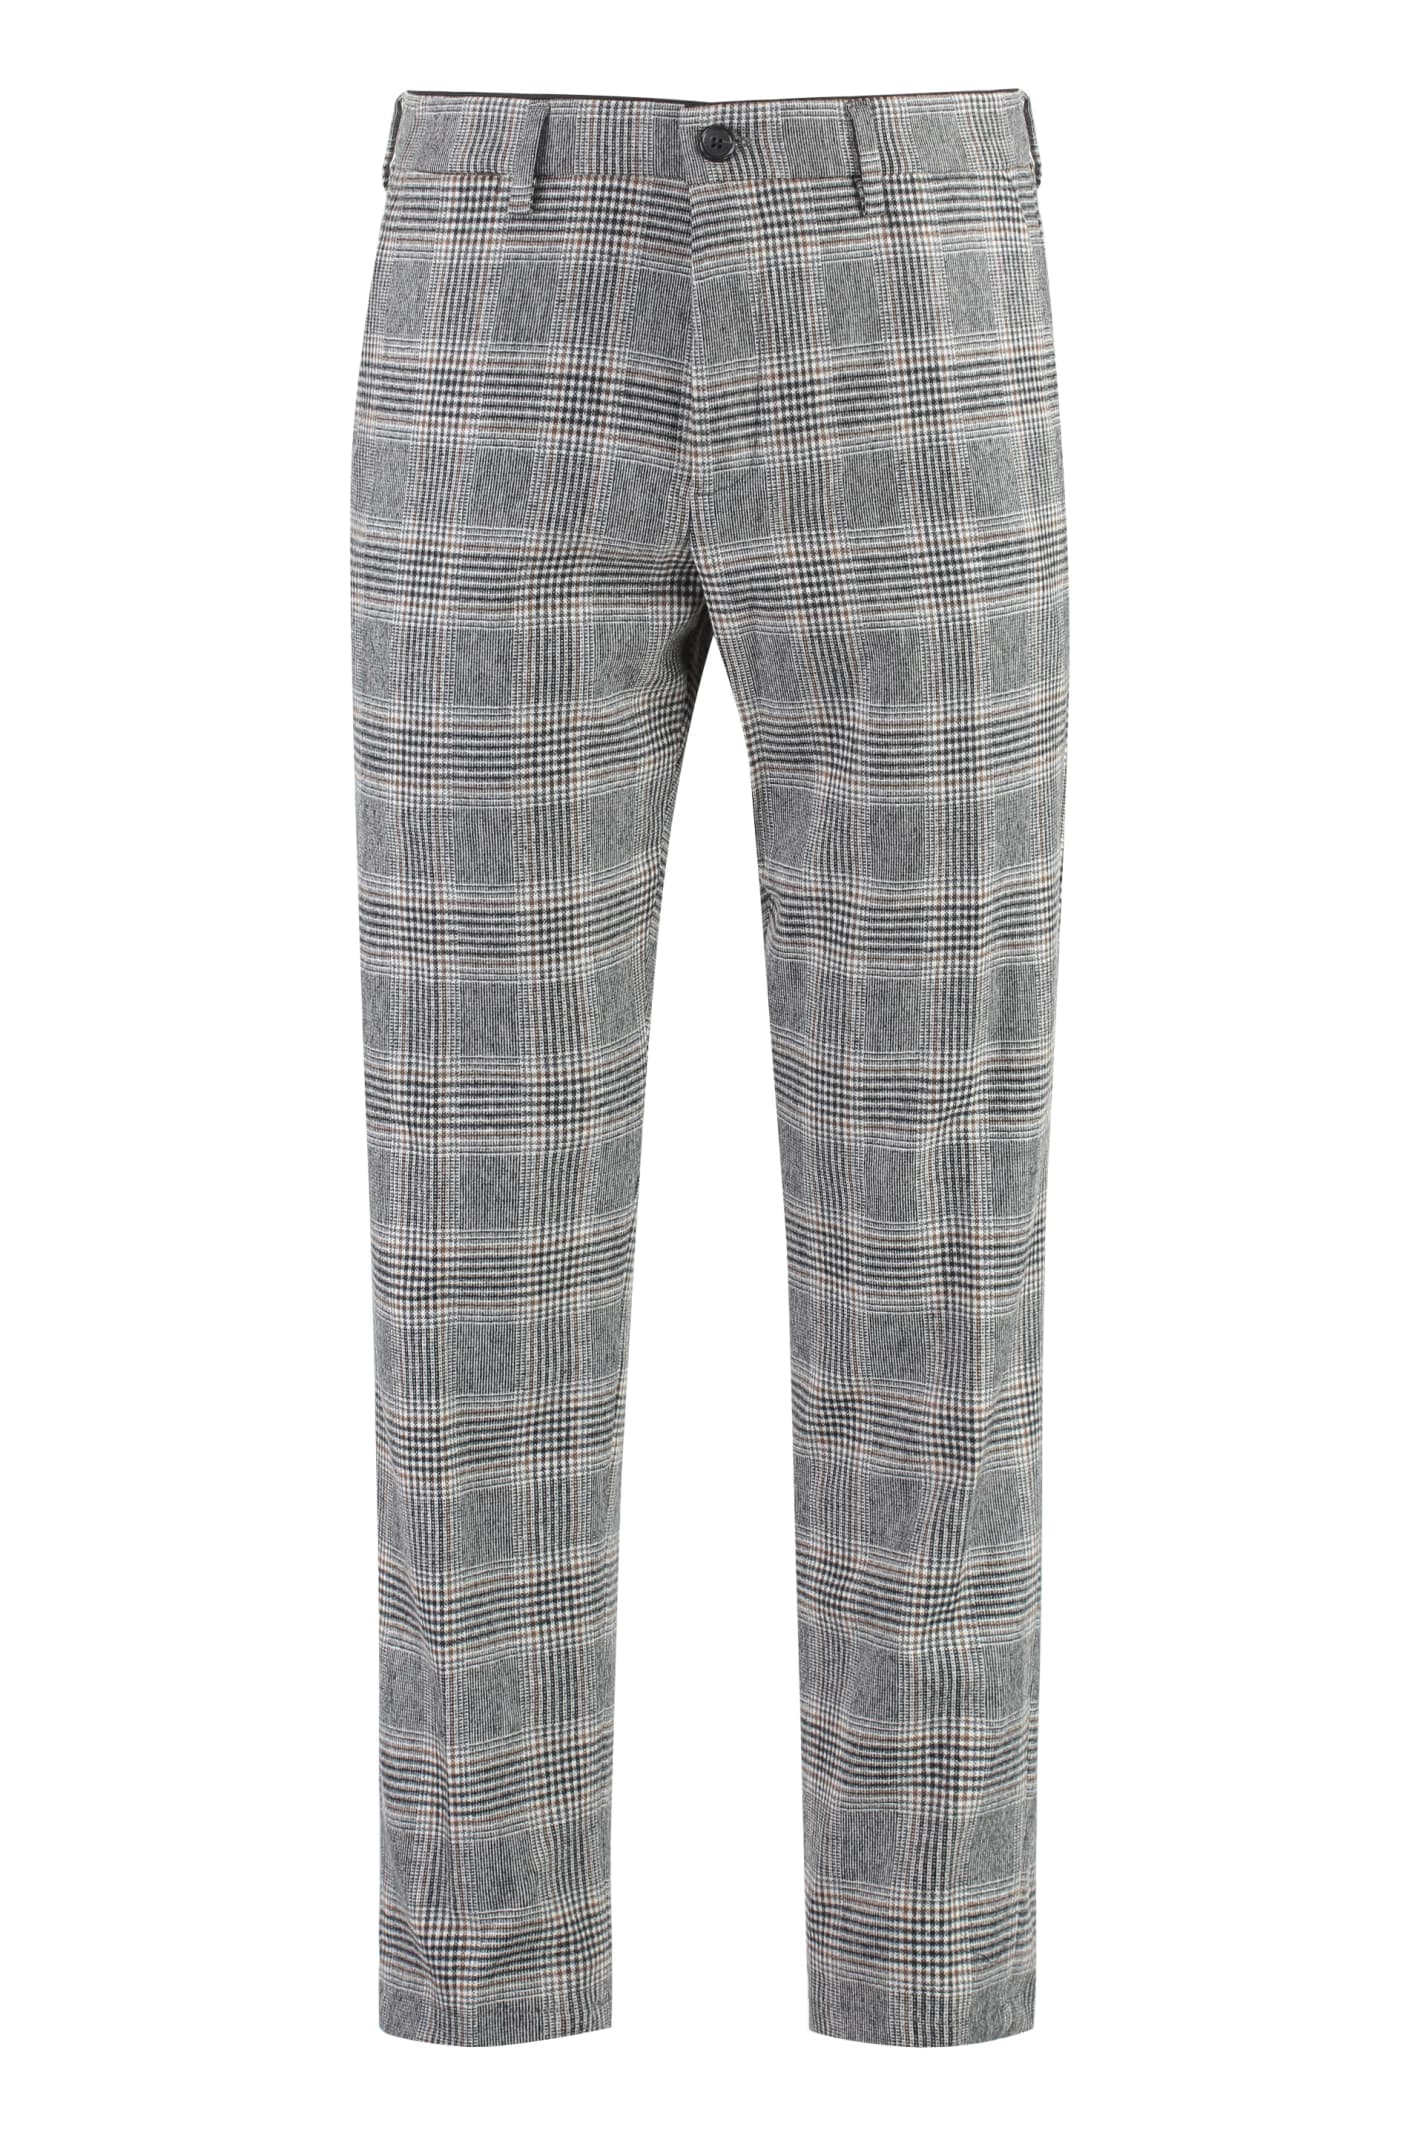 Department Five Setter Chino Pants In Wool Blend In Grey